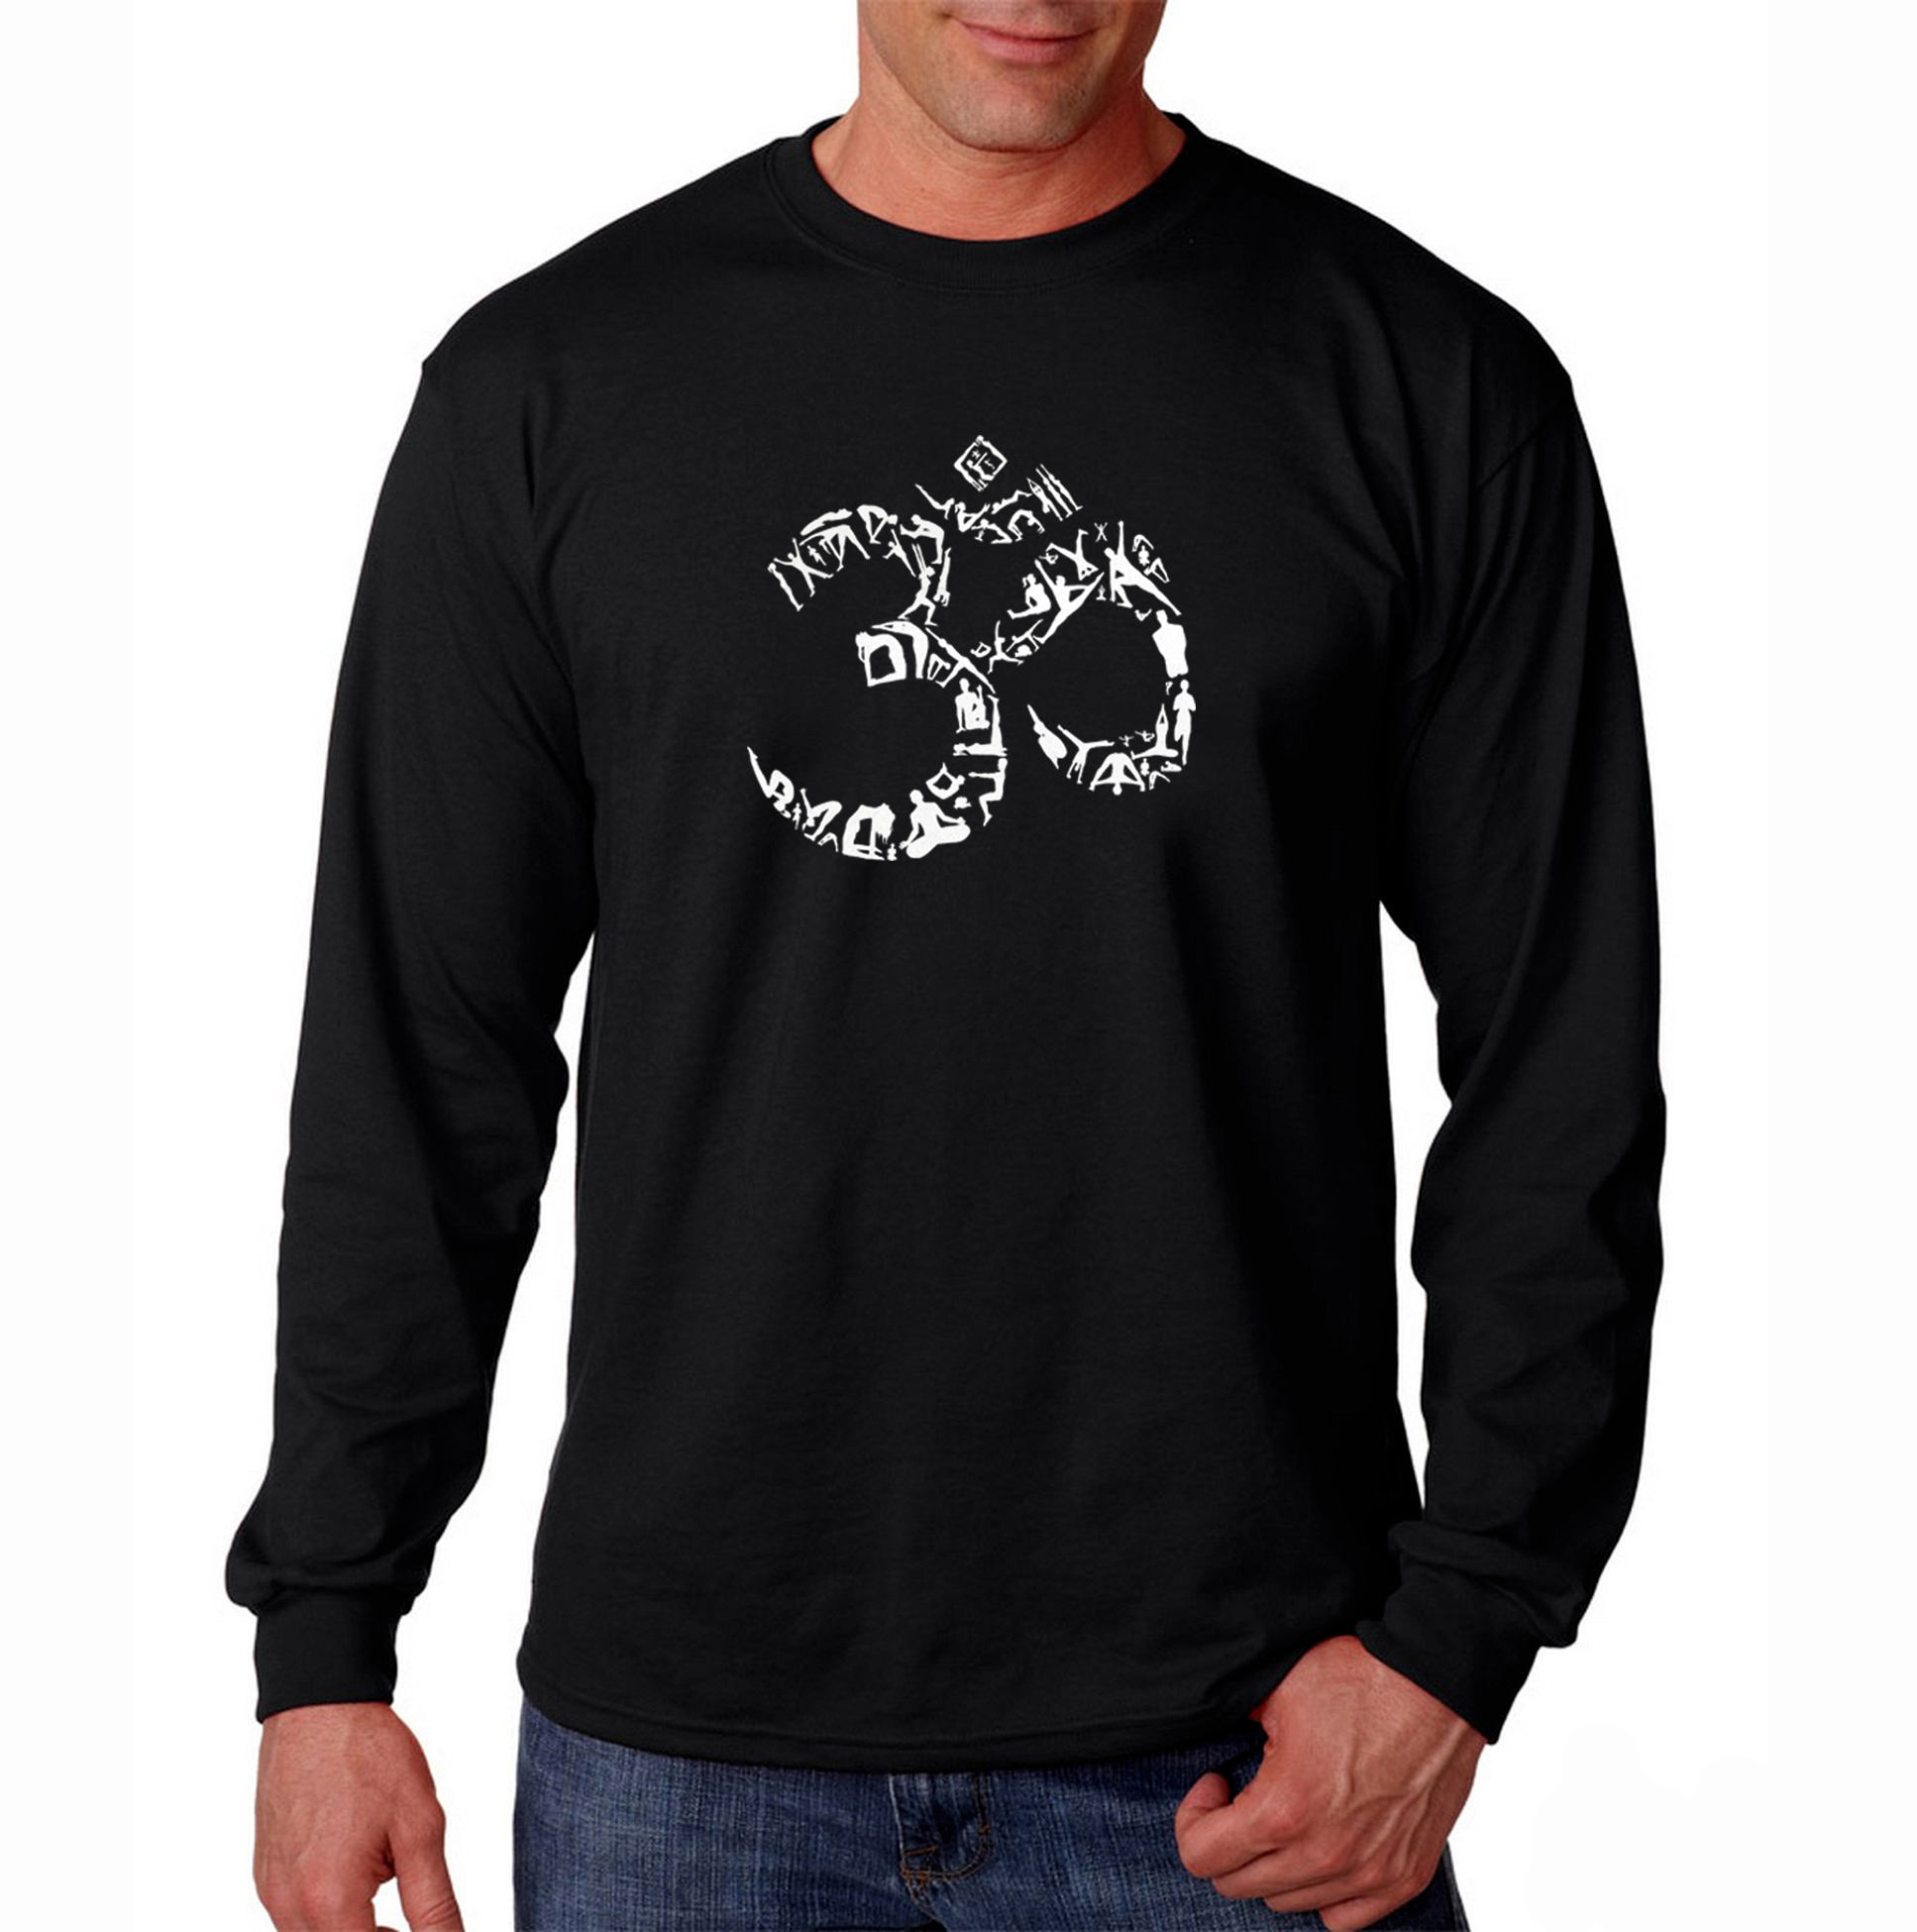 Los Angeles Pop Art Men's Word Art Long Sleeve T-Shirt - The Om Symbol out of Yoga Poses